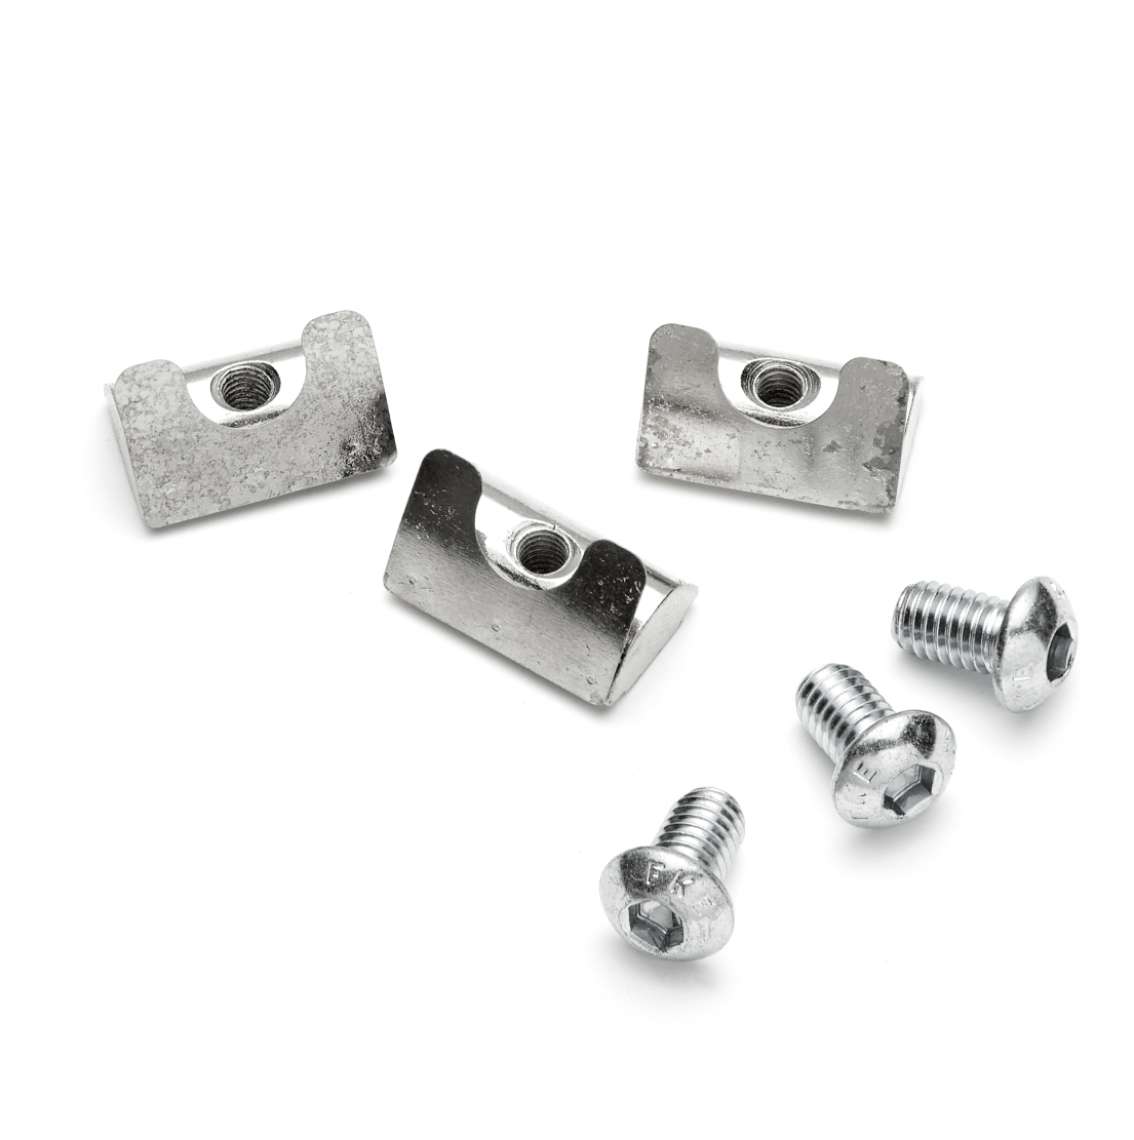 AXIS T-NUTS AND SCREW SETS